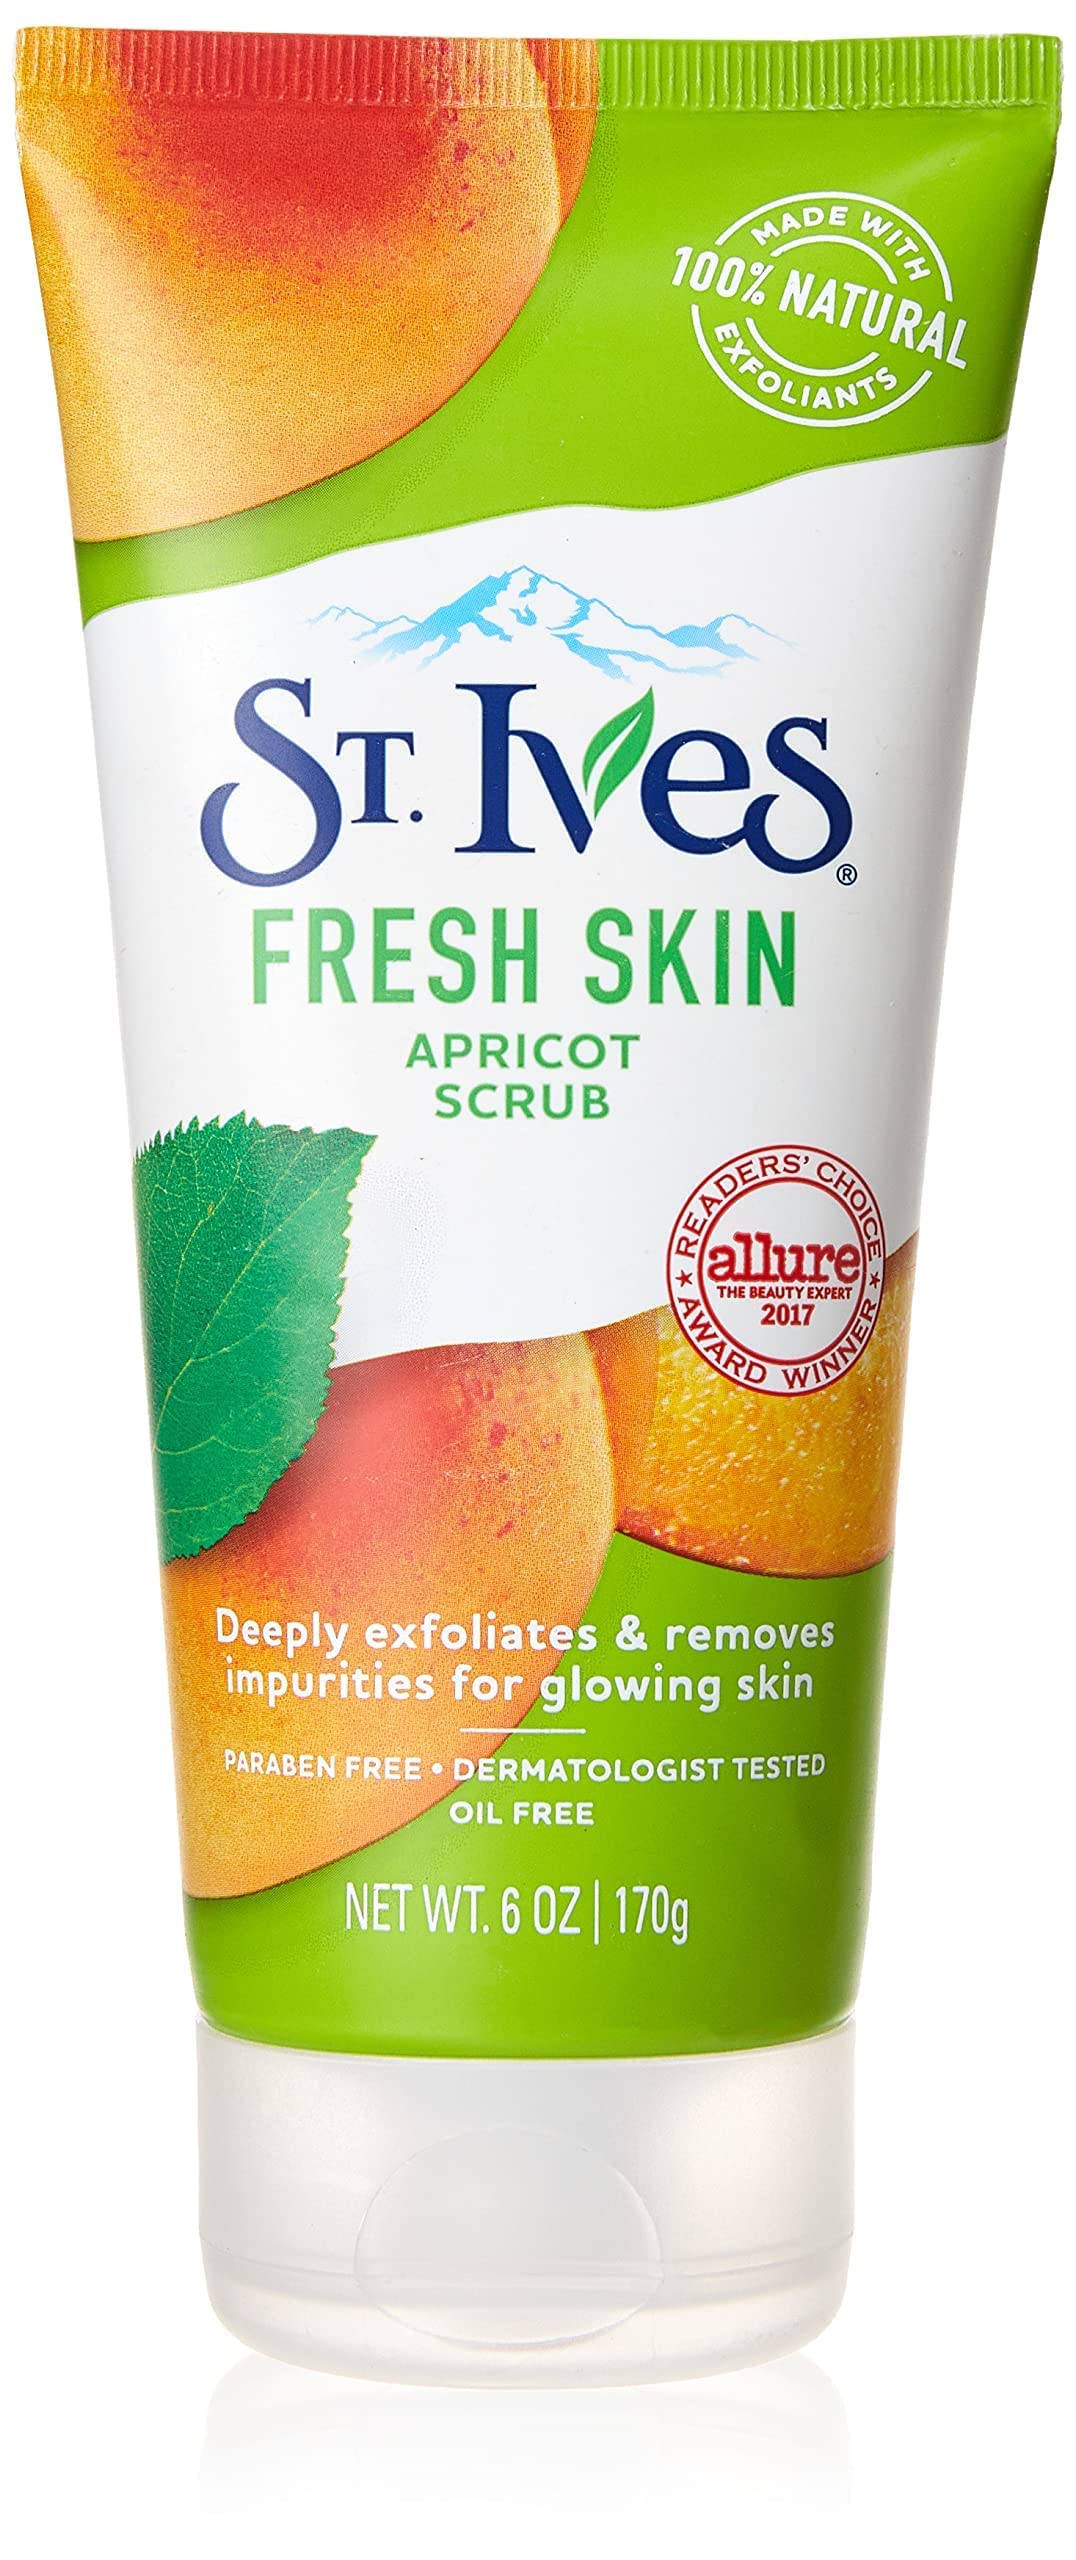 St. Ives Fresh Skin Face Scrub Deeply Exfoliates for Smooth, Glowing Skin Apricot Dermatologist Tested, Made with 100% Natural Exfoliants 6 oz